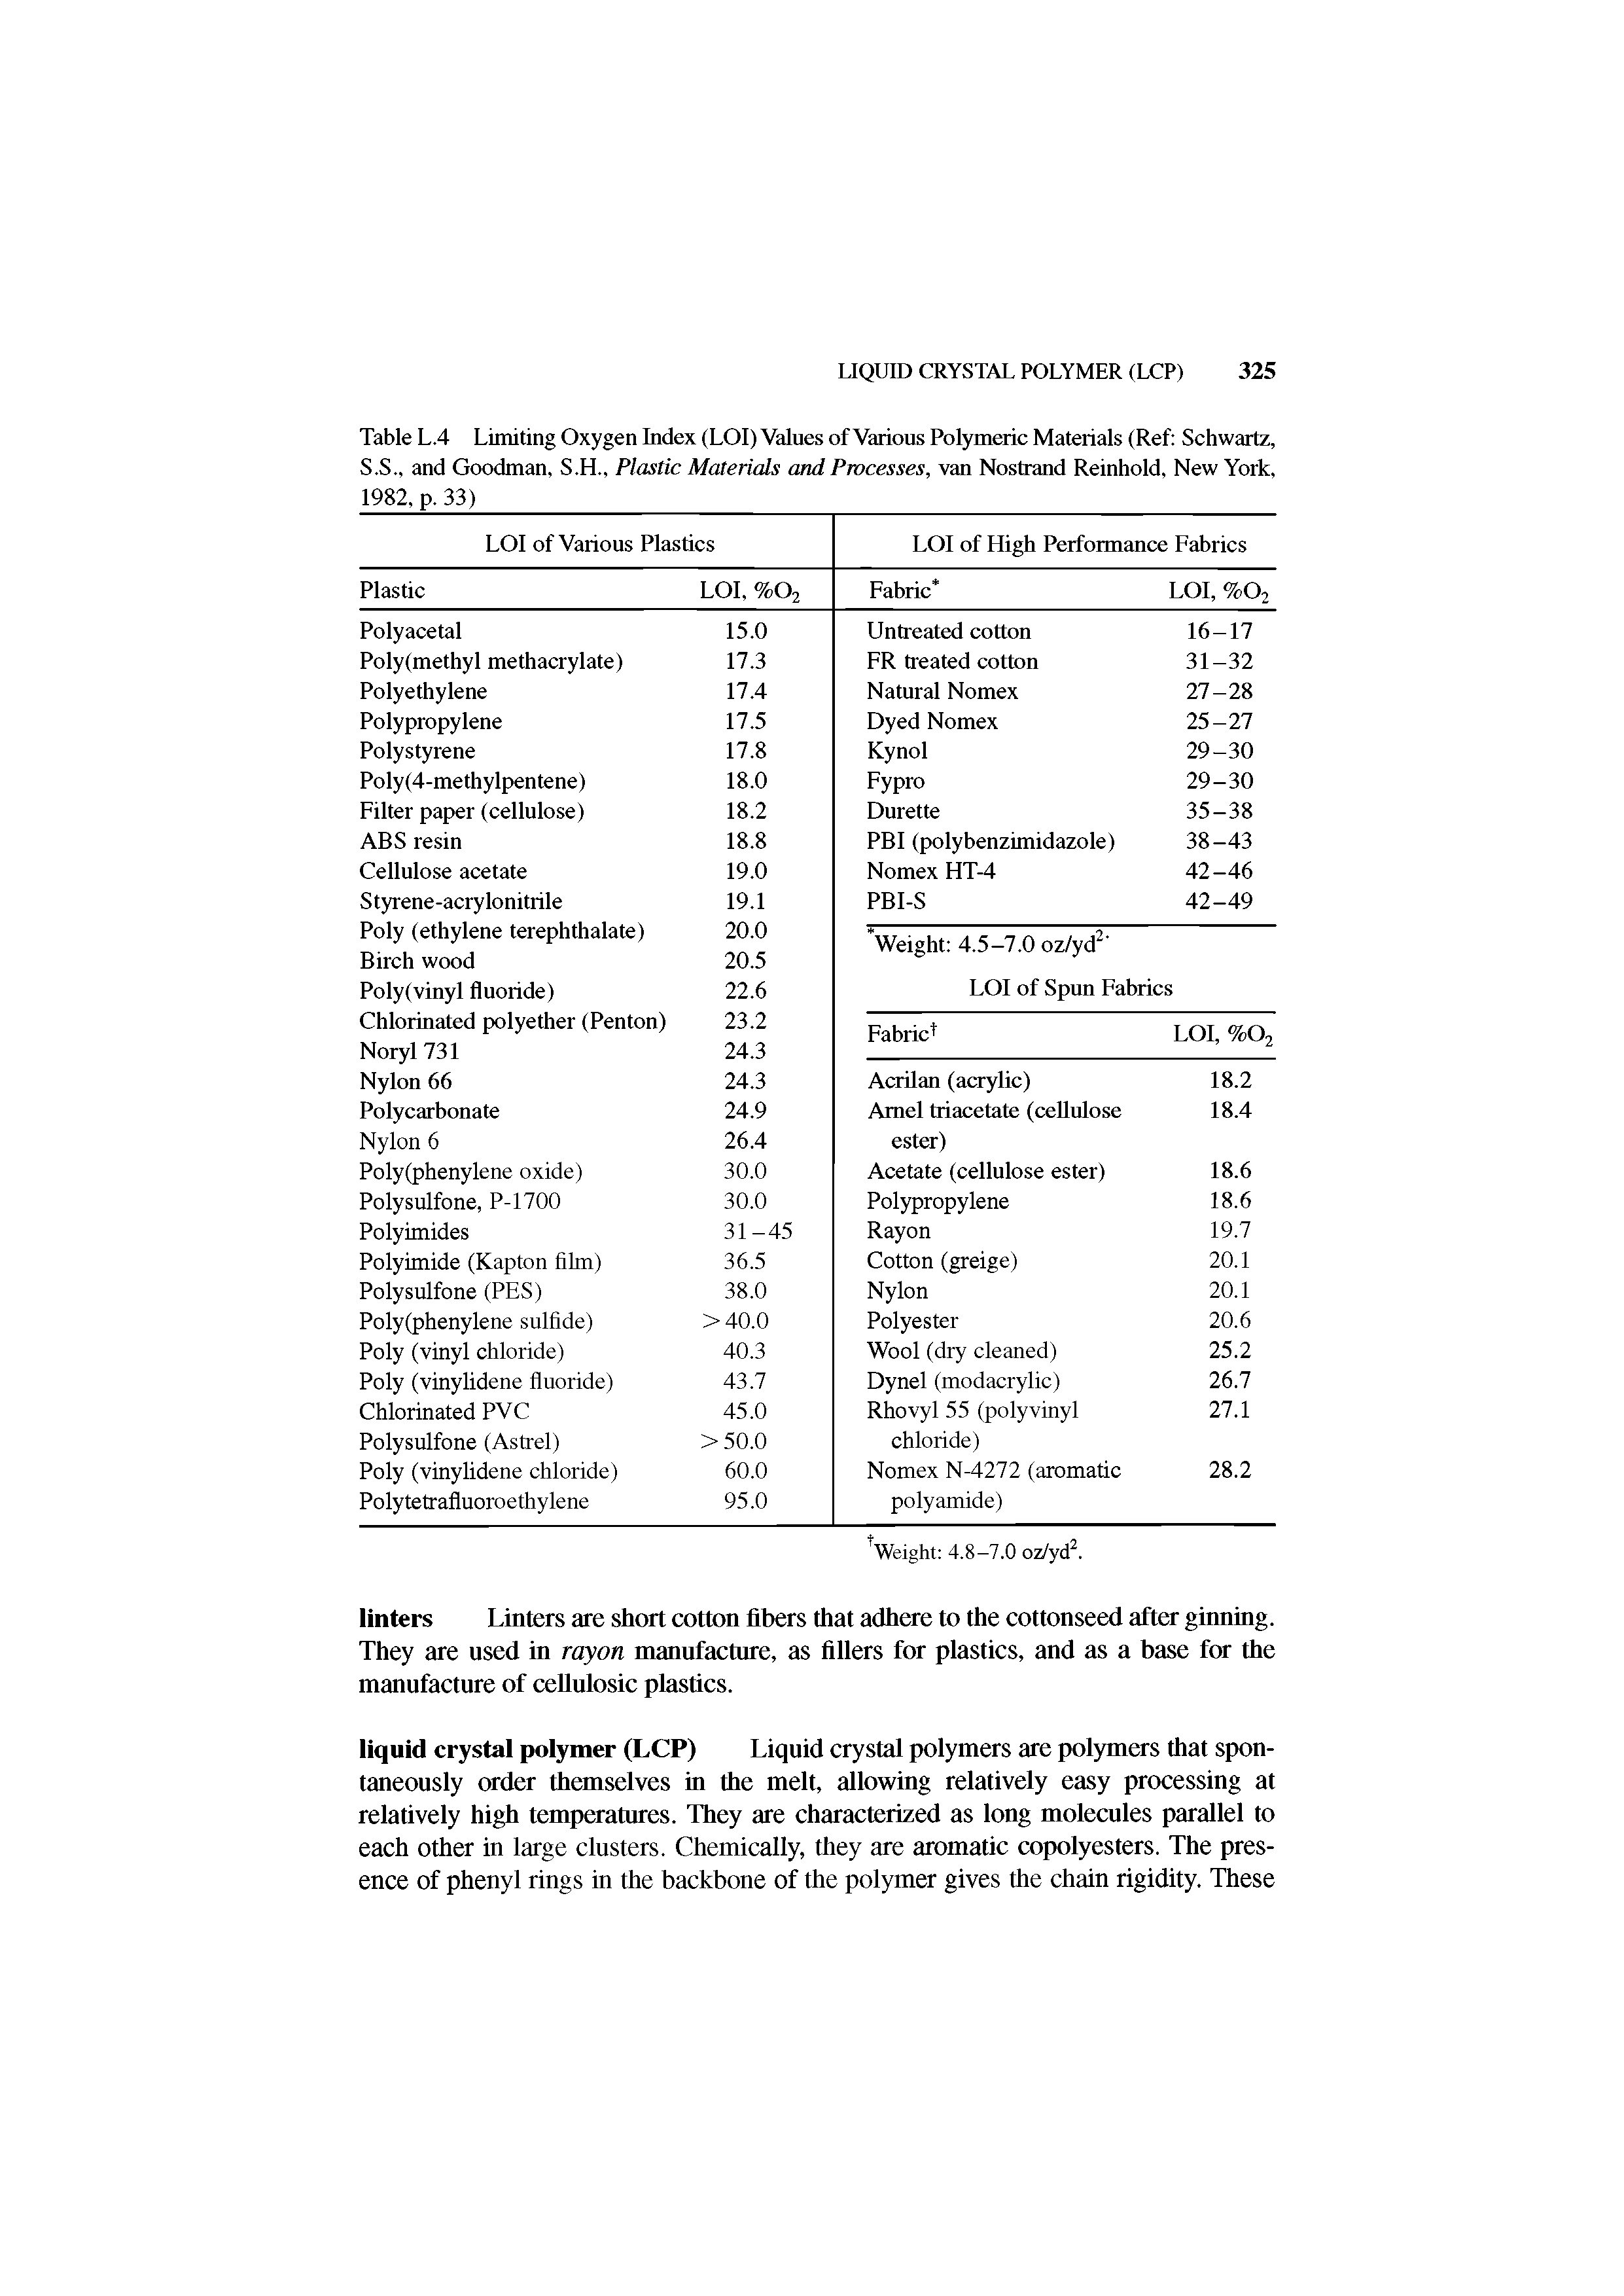 Table L.4 Limiting Oxygen Index (LOI) Values of Various Polymeric Materials (Ref Schwartz, S.S., and Goodman, S.H., Plastic Materials and Processes, van Nostrand Reinhold, New York, 1982, p. 33)...